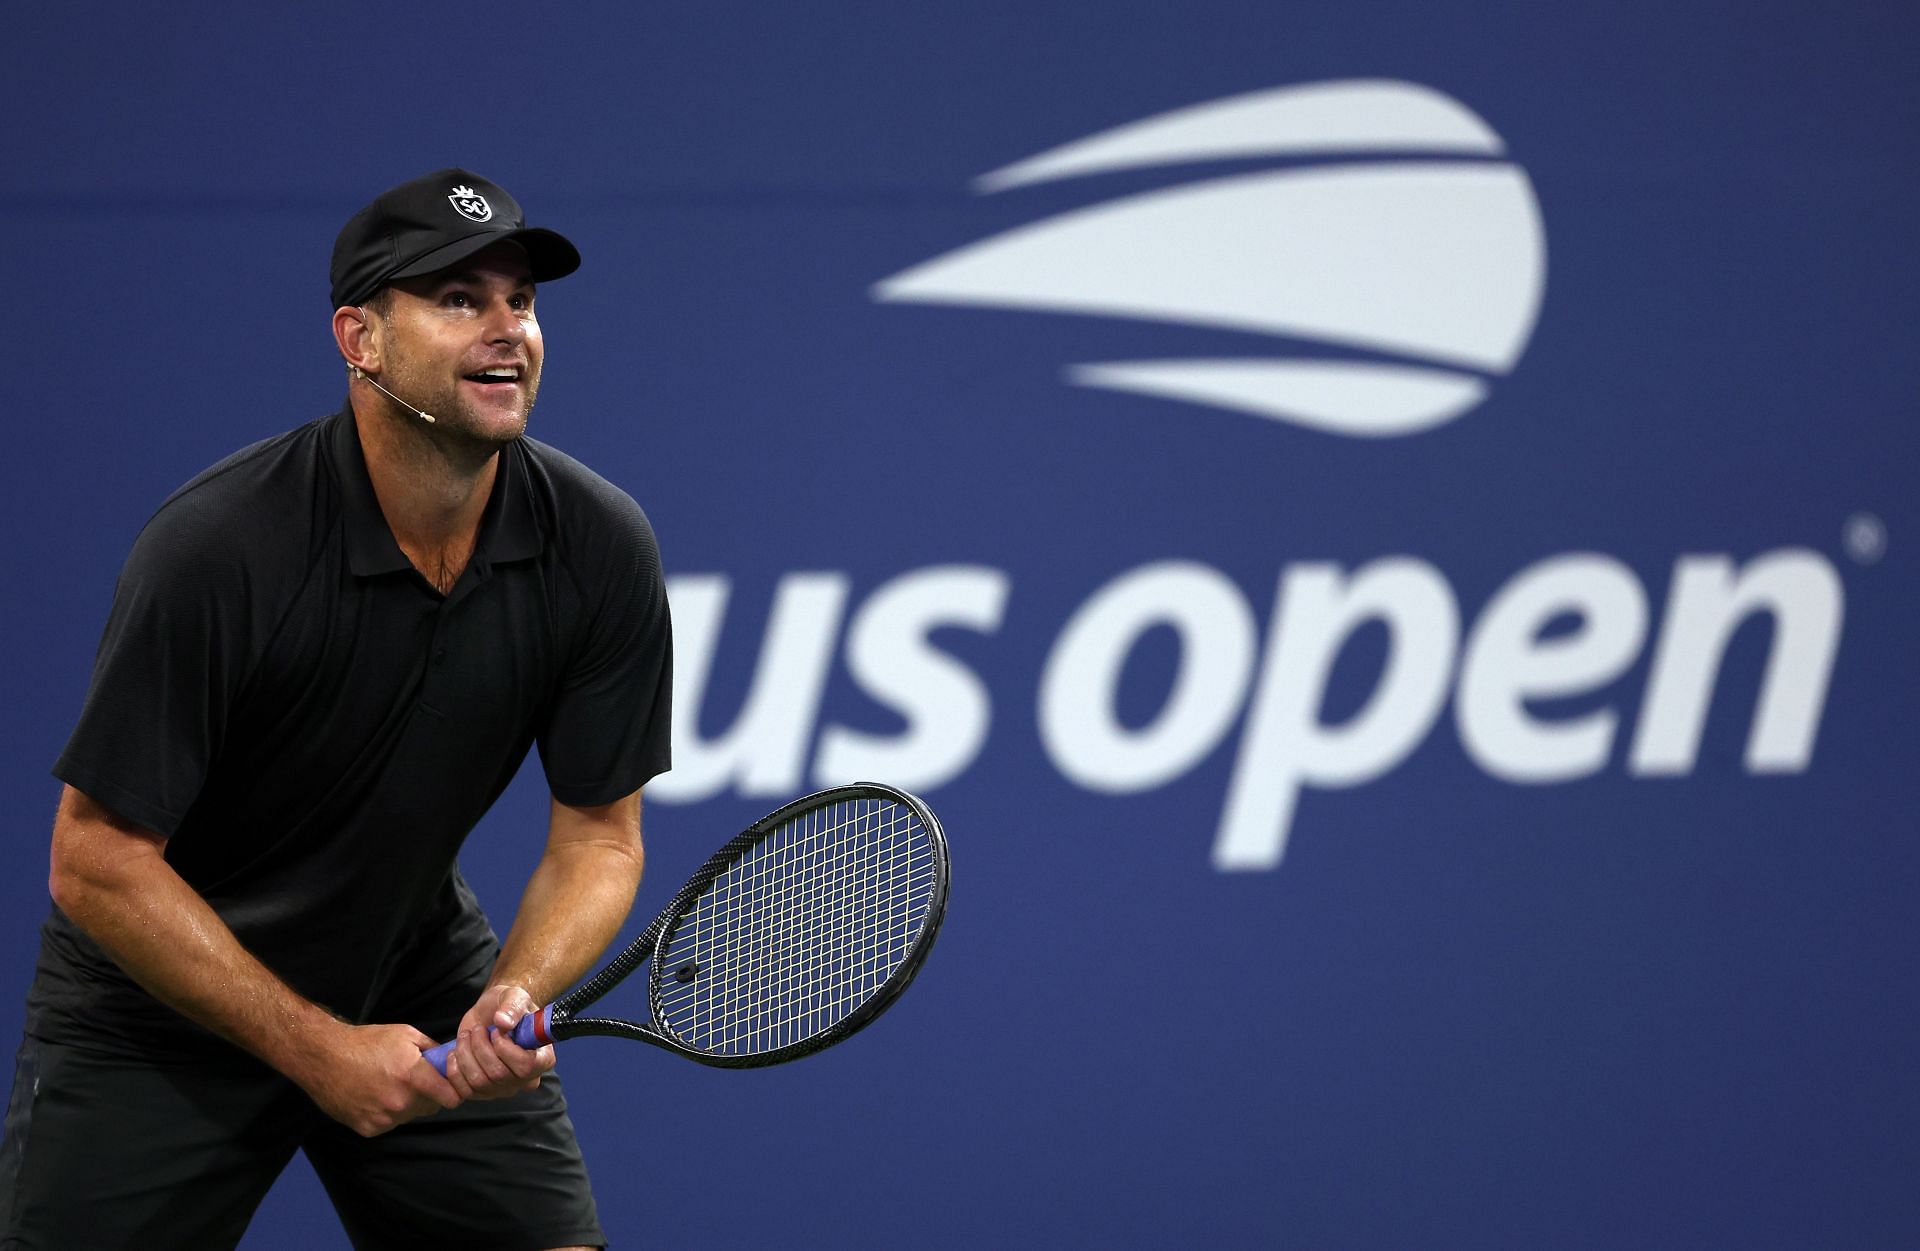 Andy Roddick plays an exhibition match: 2022 US Open